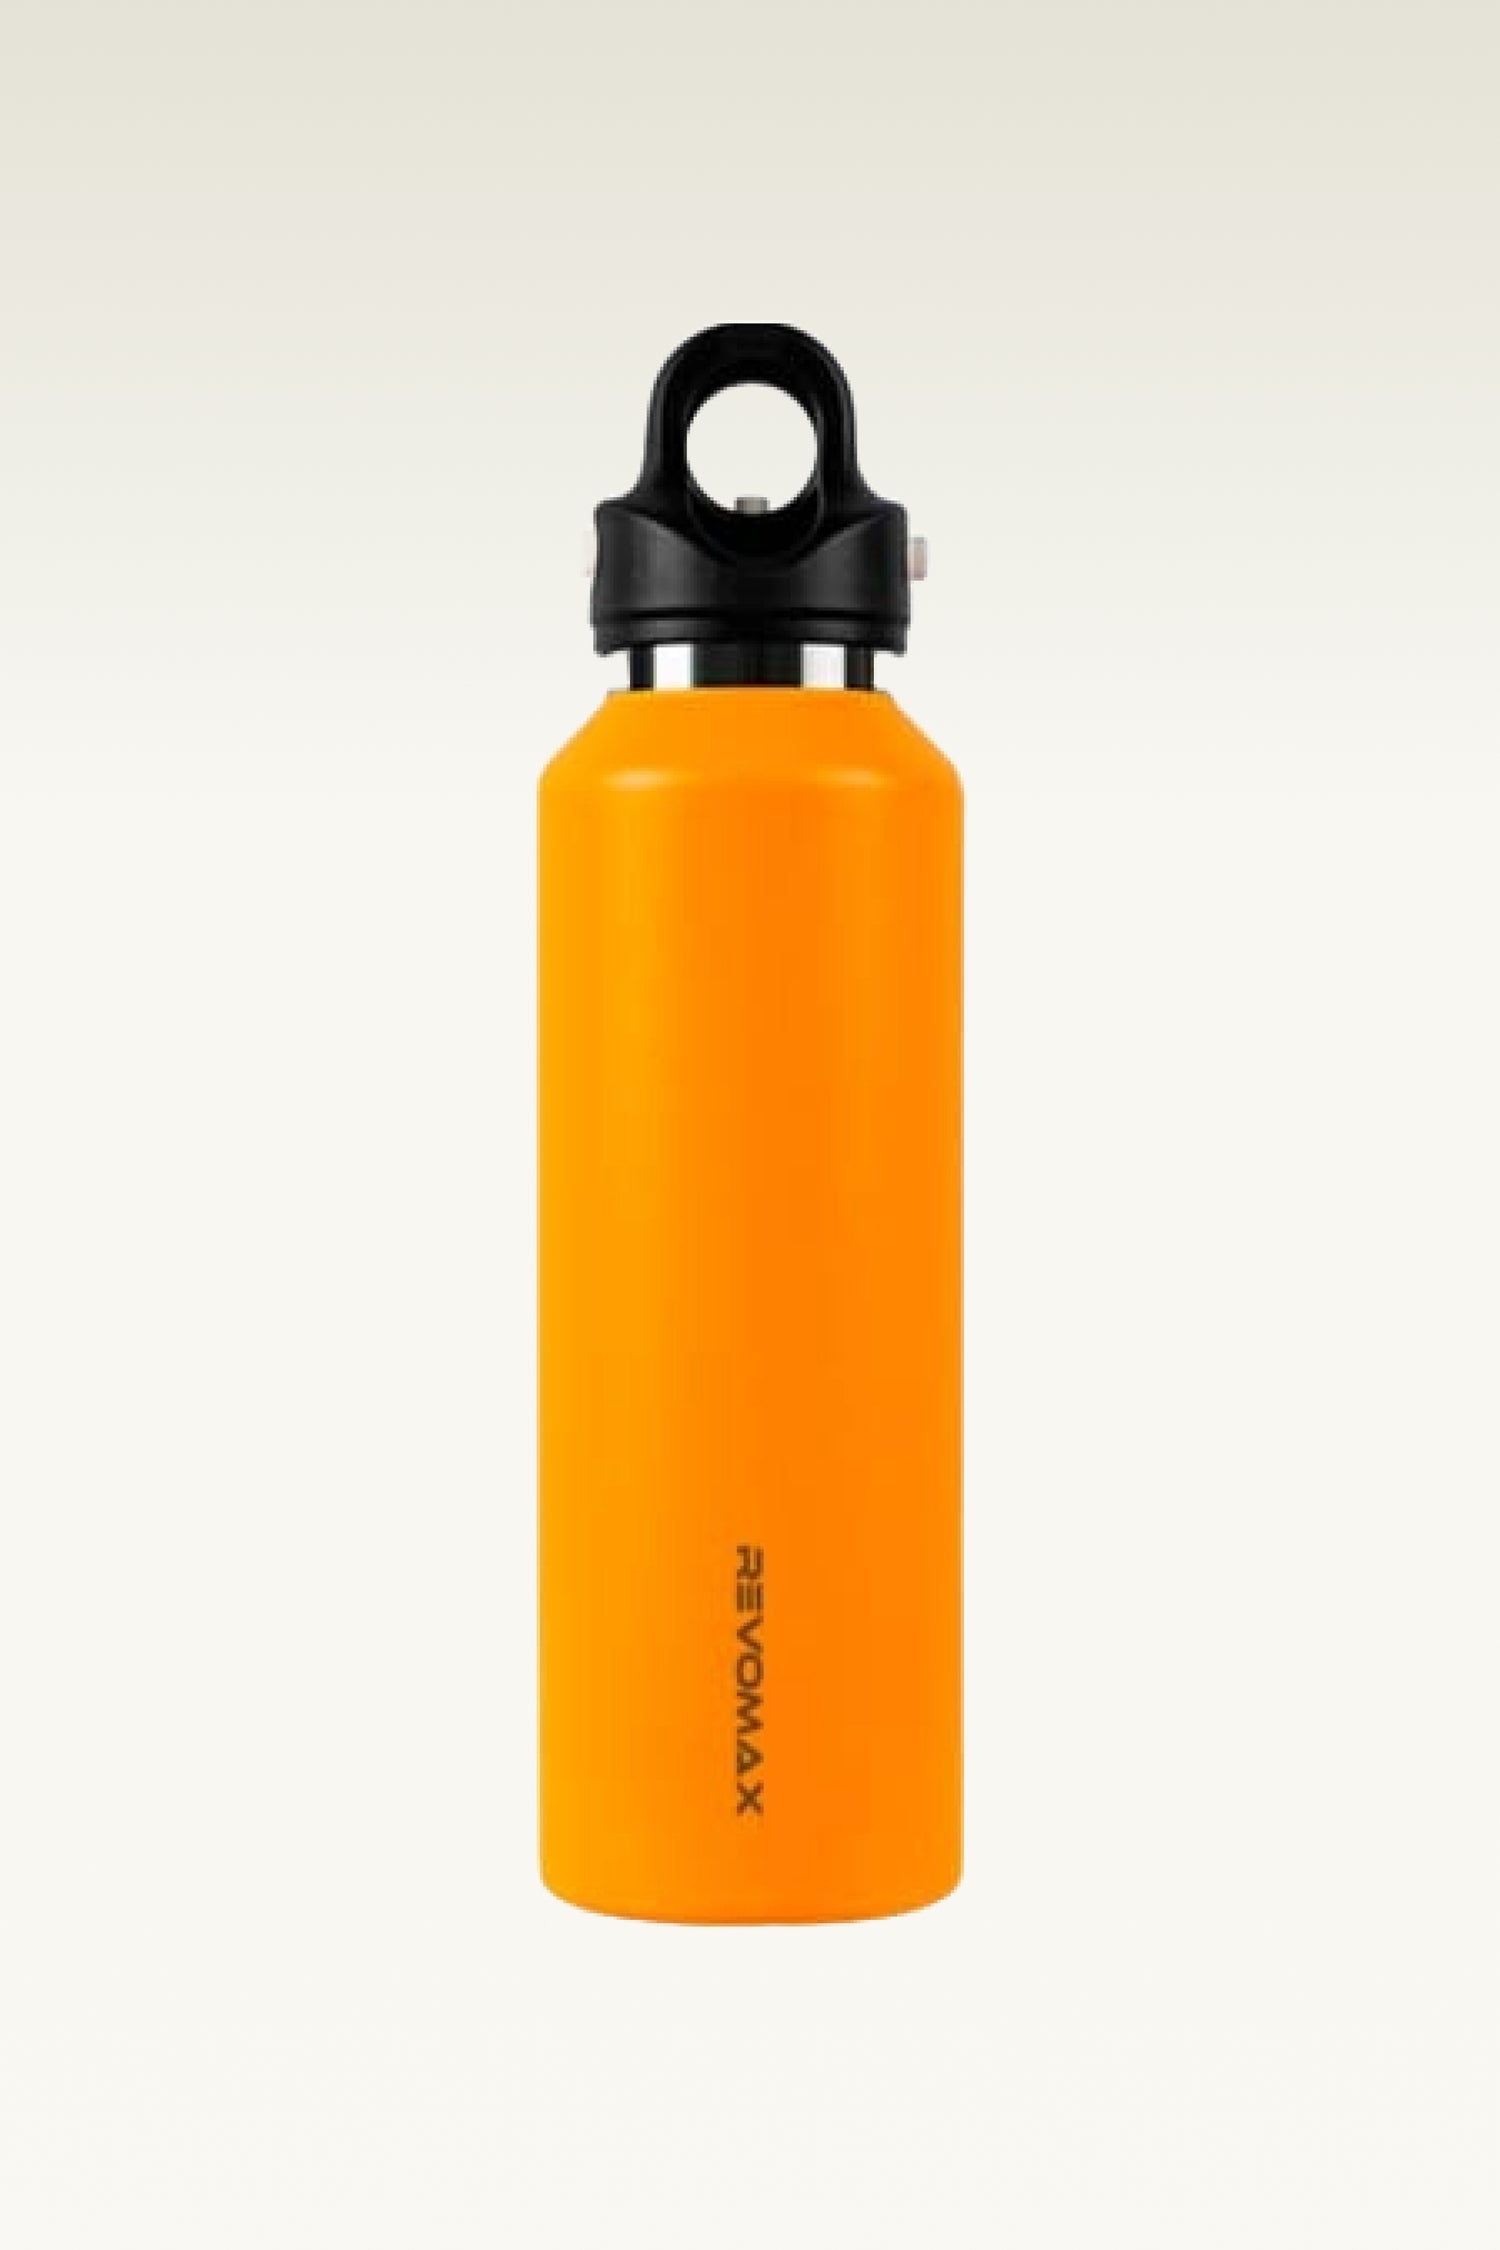 Hikesity's innovative, no-screw design, yellow 20oz water bottle; 316L stainless steel lining, exceptional durability, corrosion resistance, and heat retention.